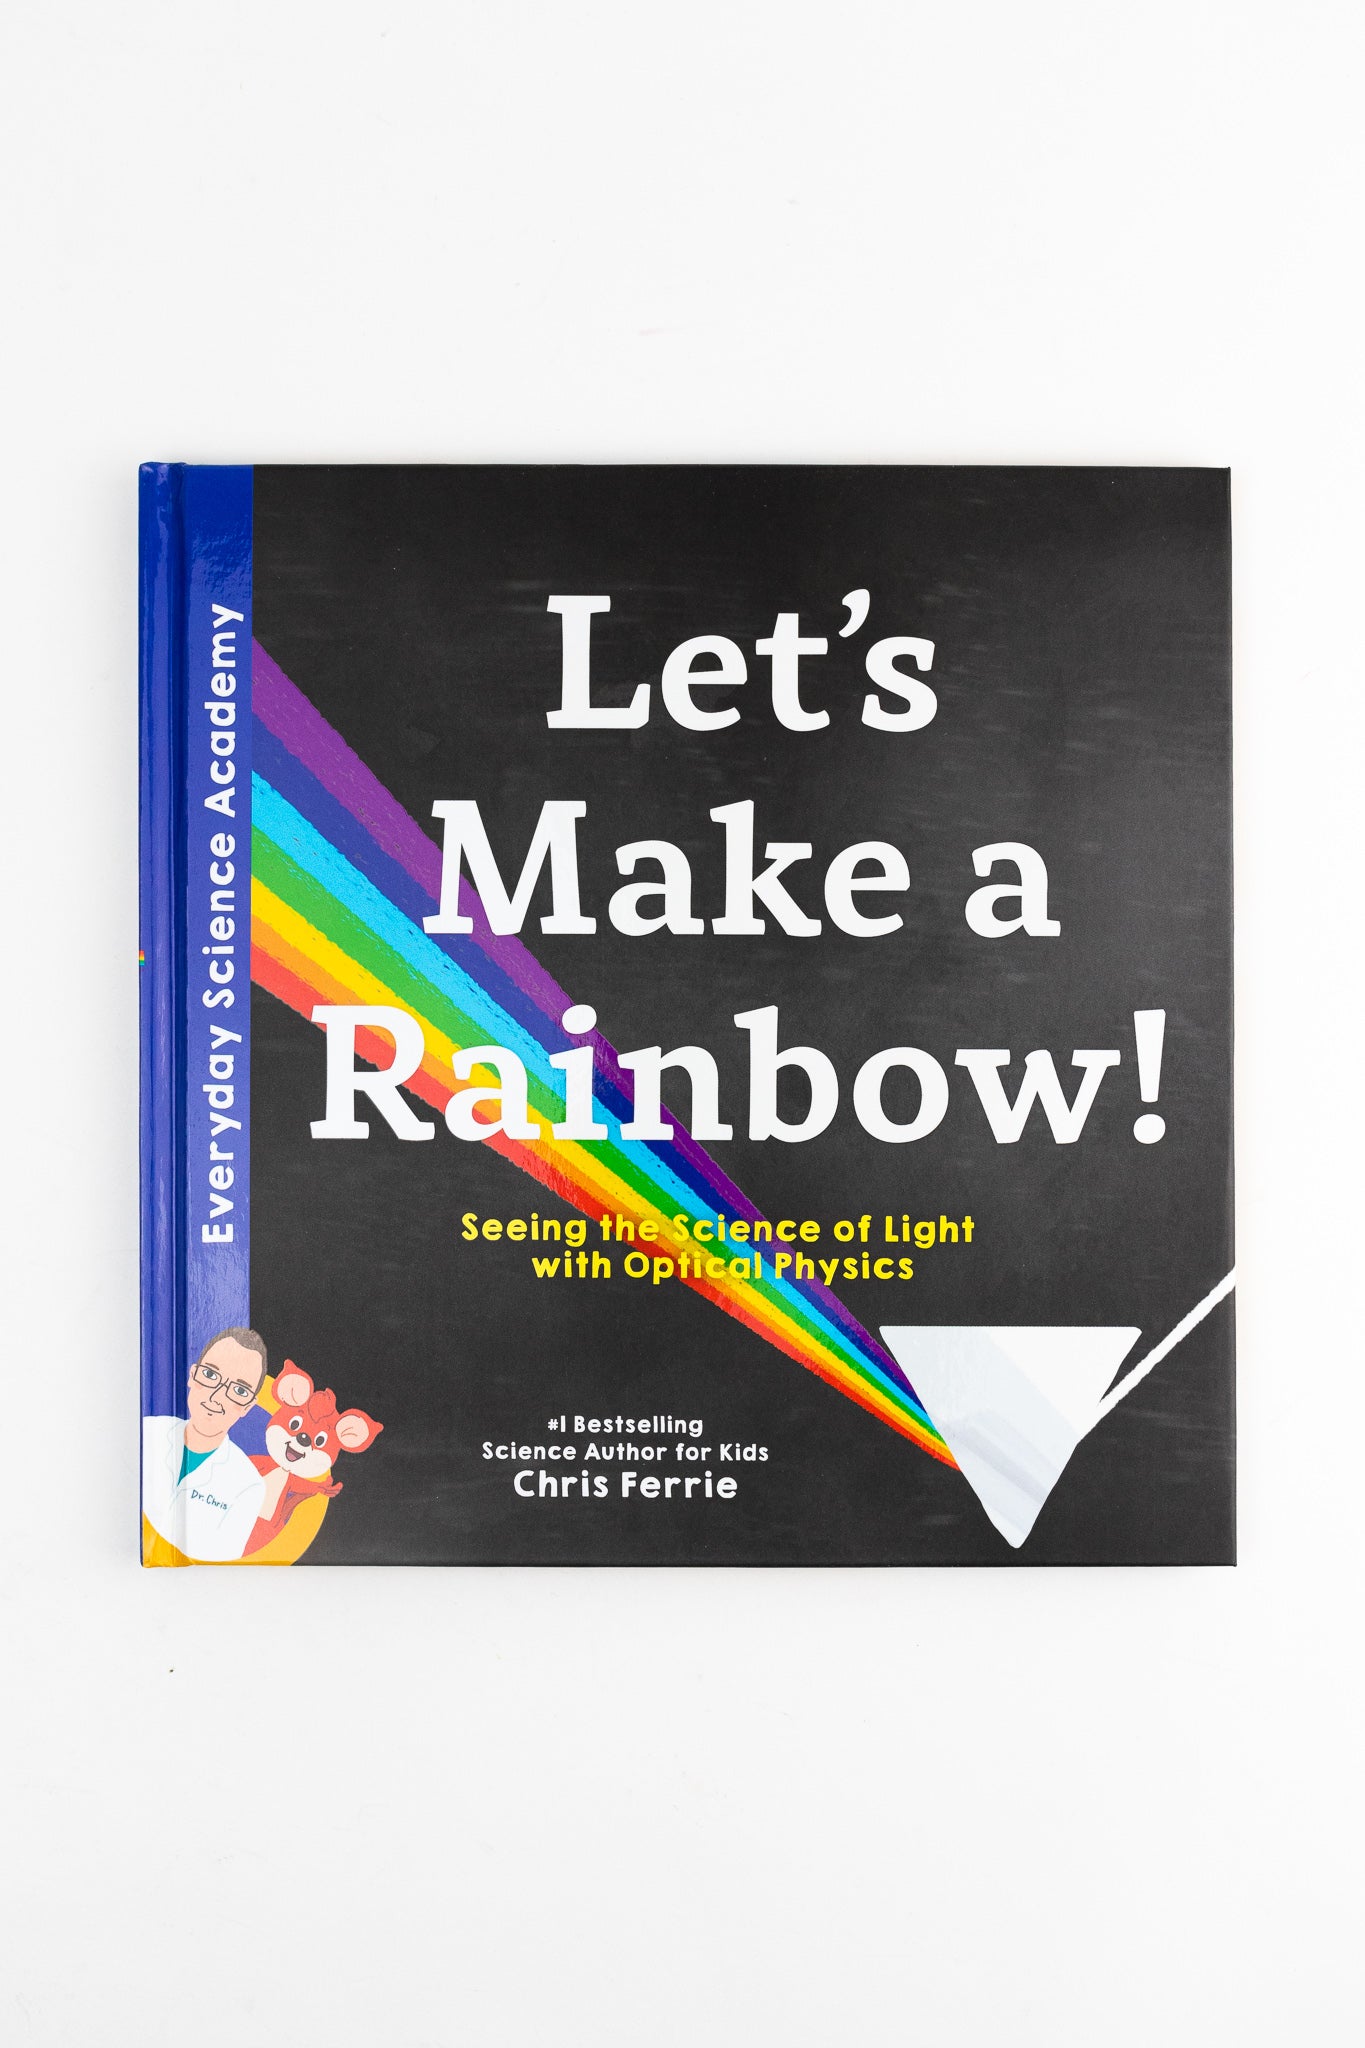 Let's Make a Rainbow!: Seeing the Science of Light with Optical Physics